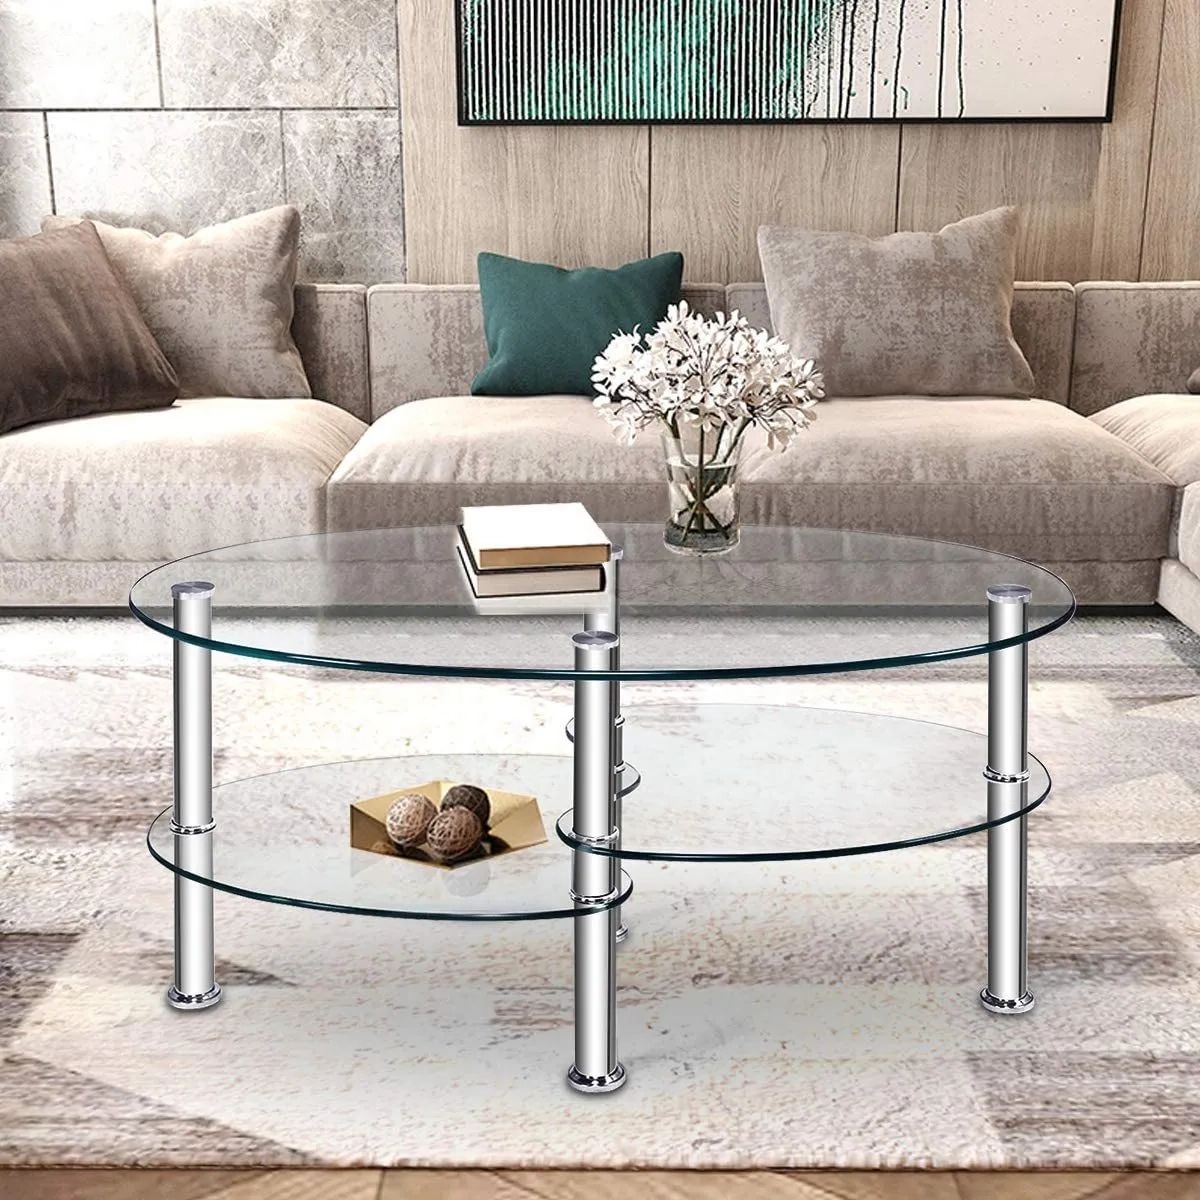 Ebay Throughout Tempered Glass Oval Side Tables (View 6 of 10)